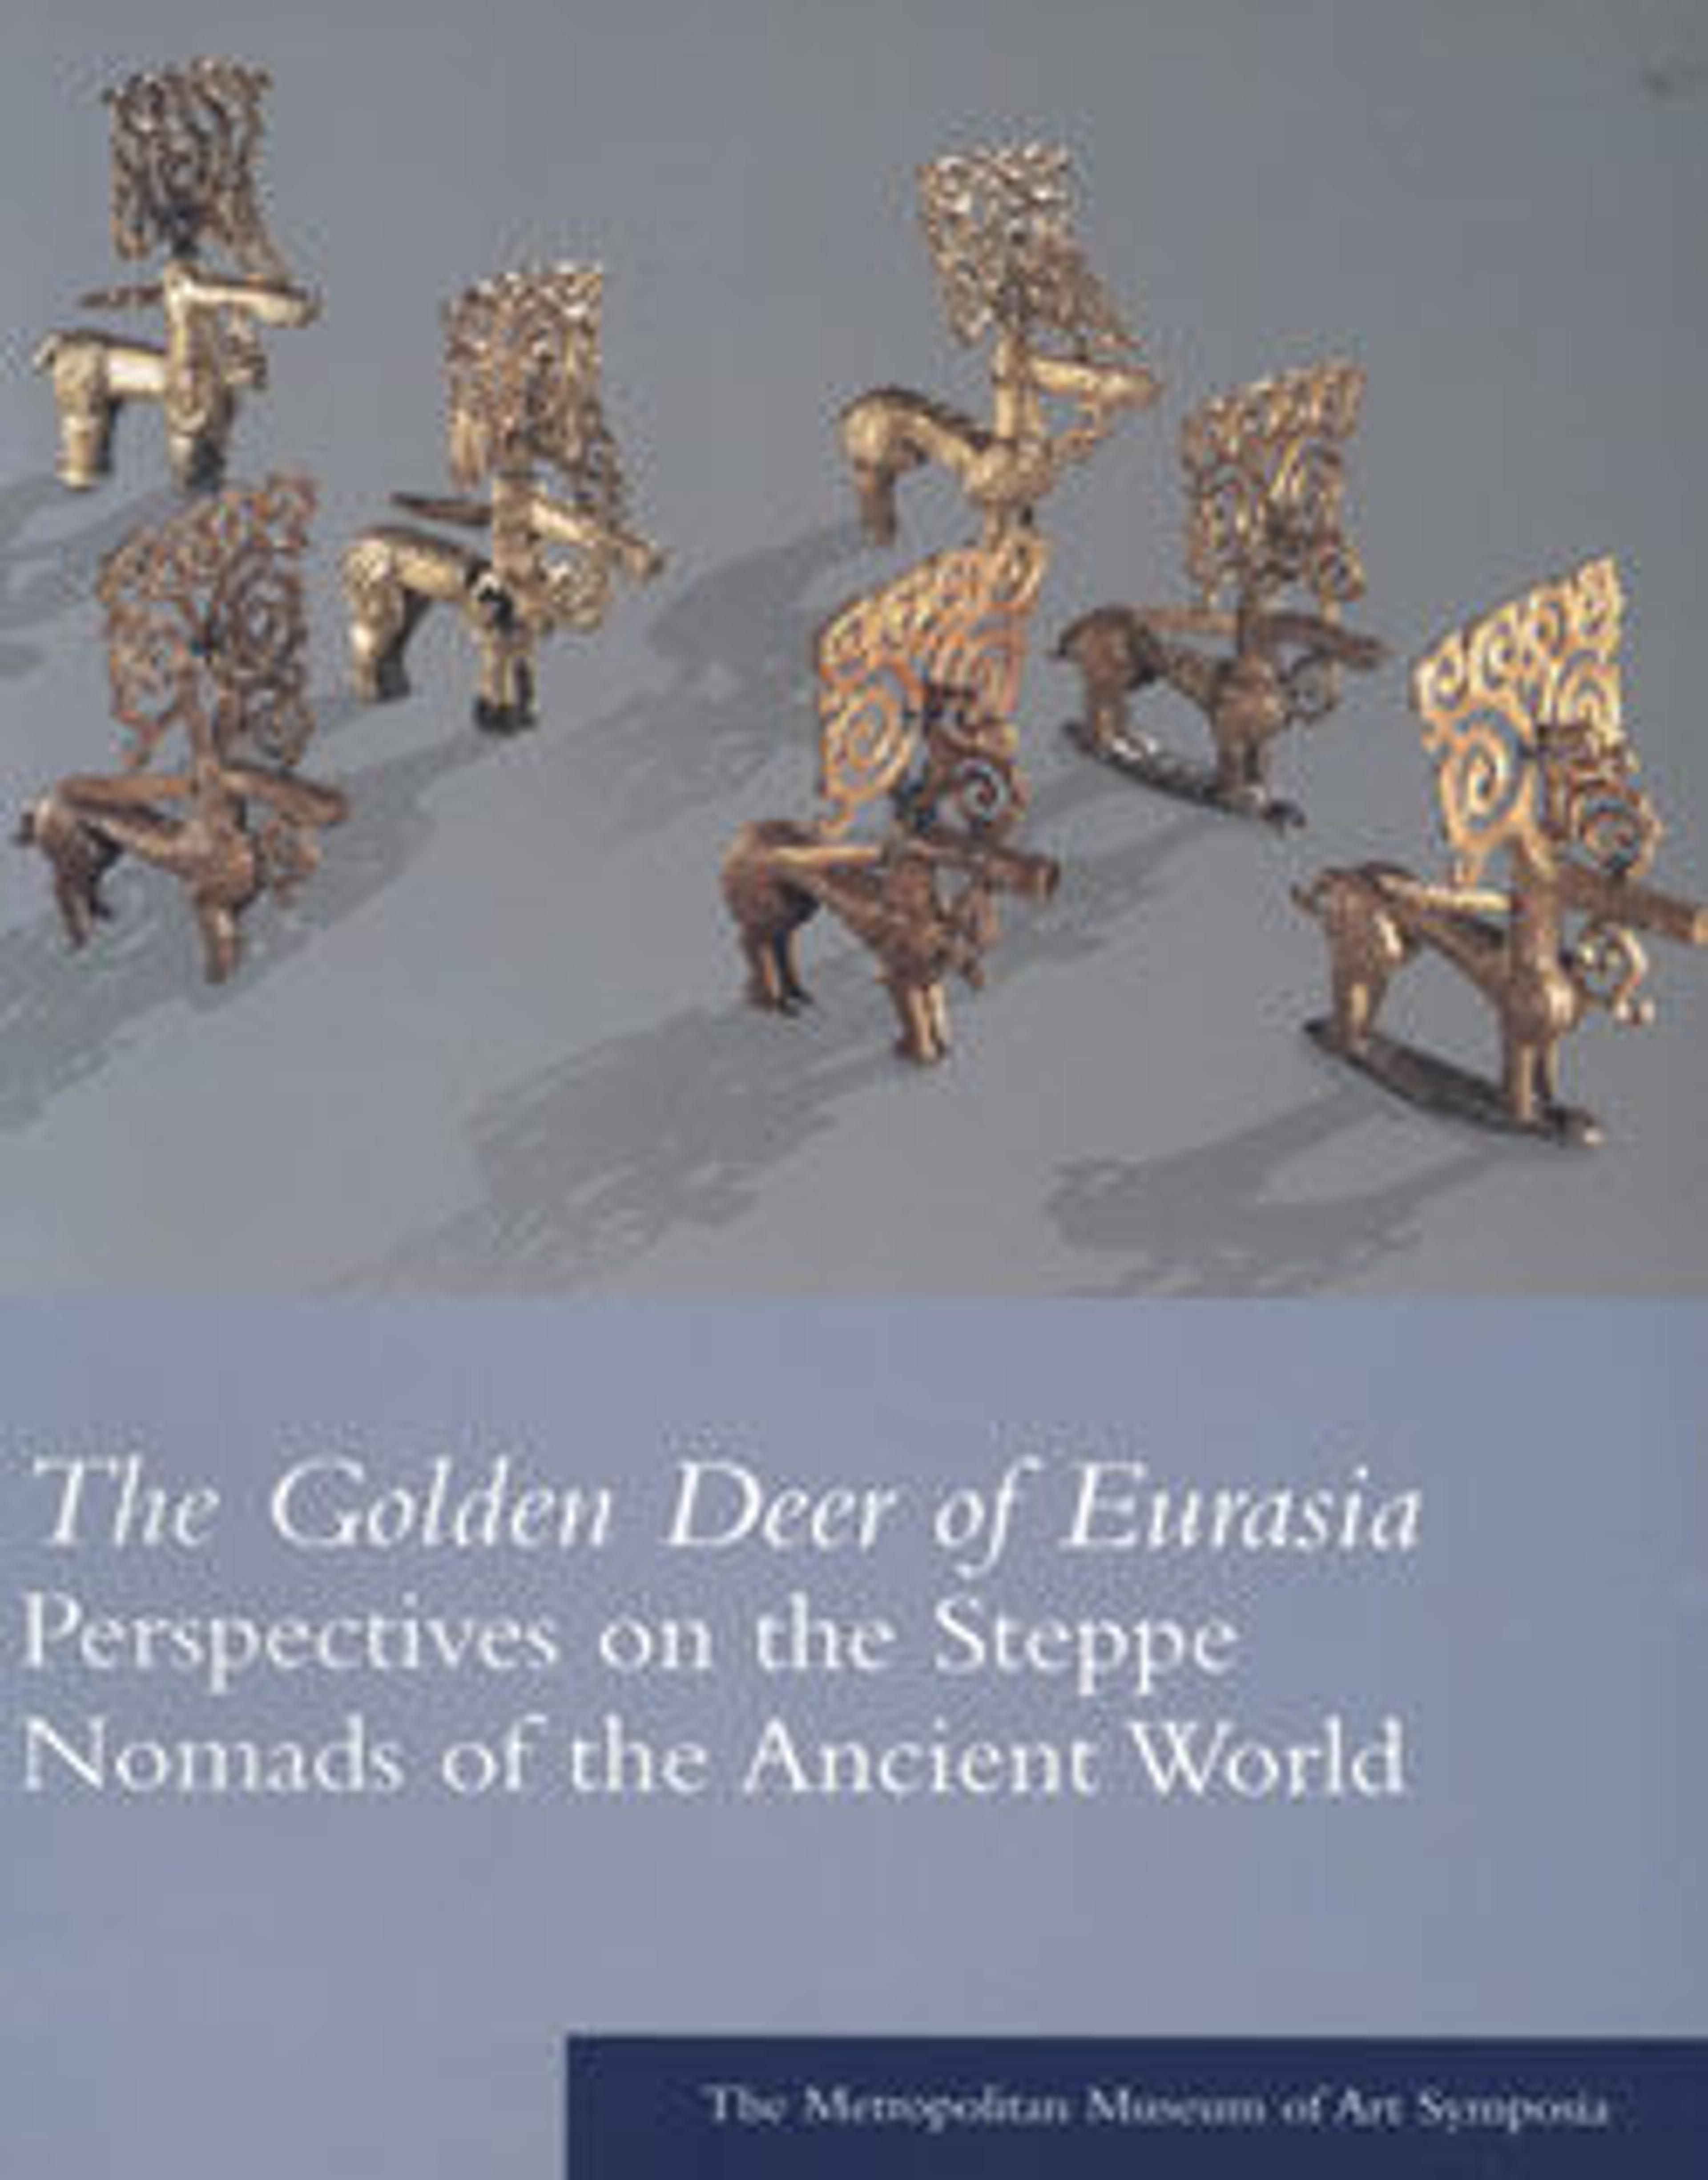 The Golden Deer of Eurasia: Perspectives on the Steppe Nomads of the Ancient World